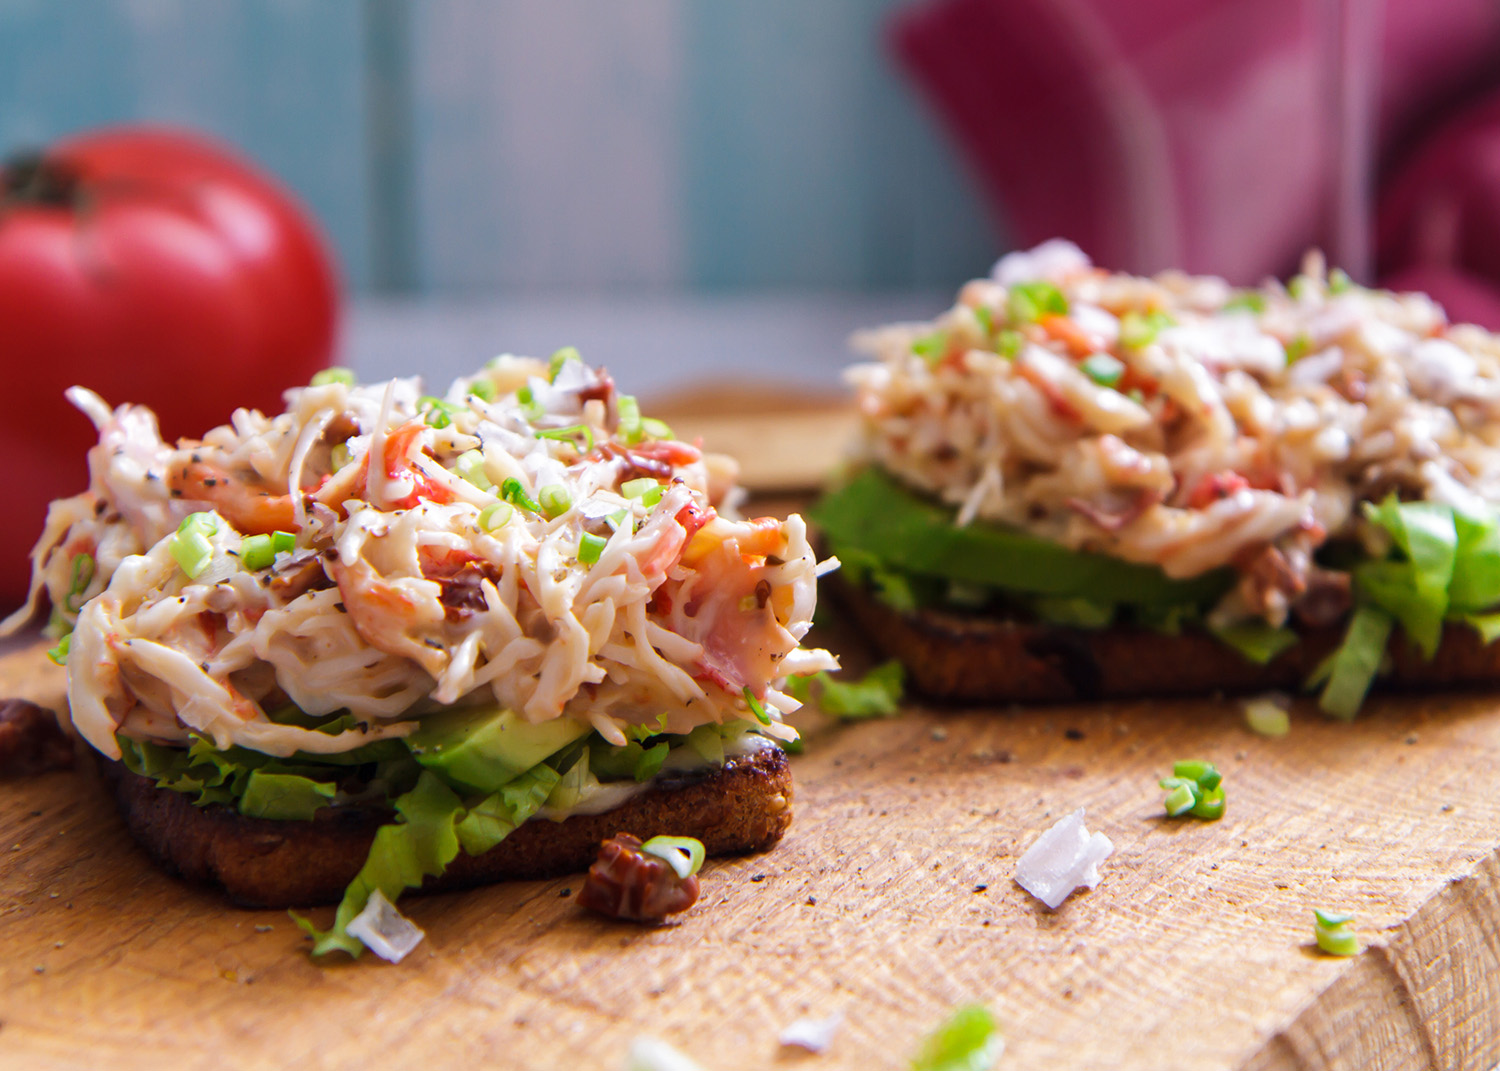 Bruschetta with crab salad served on wooden board horizontal